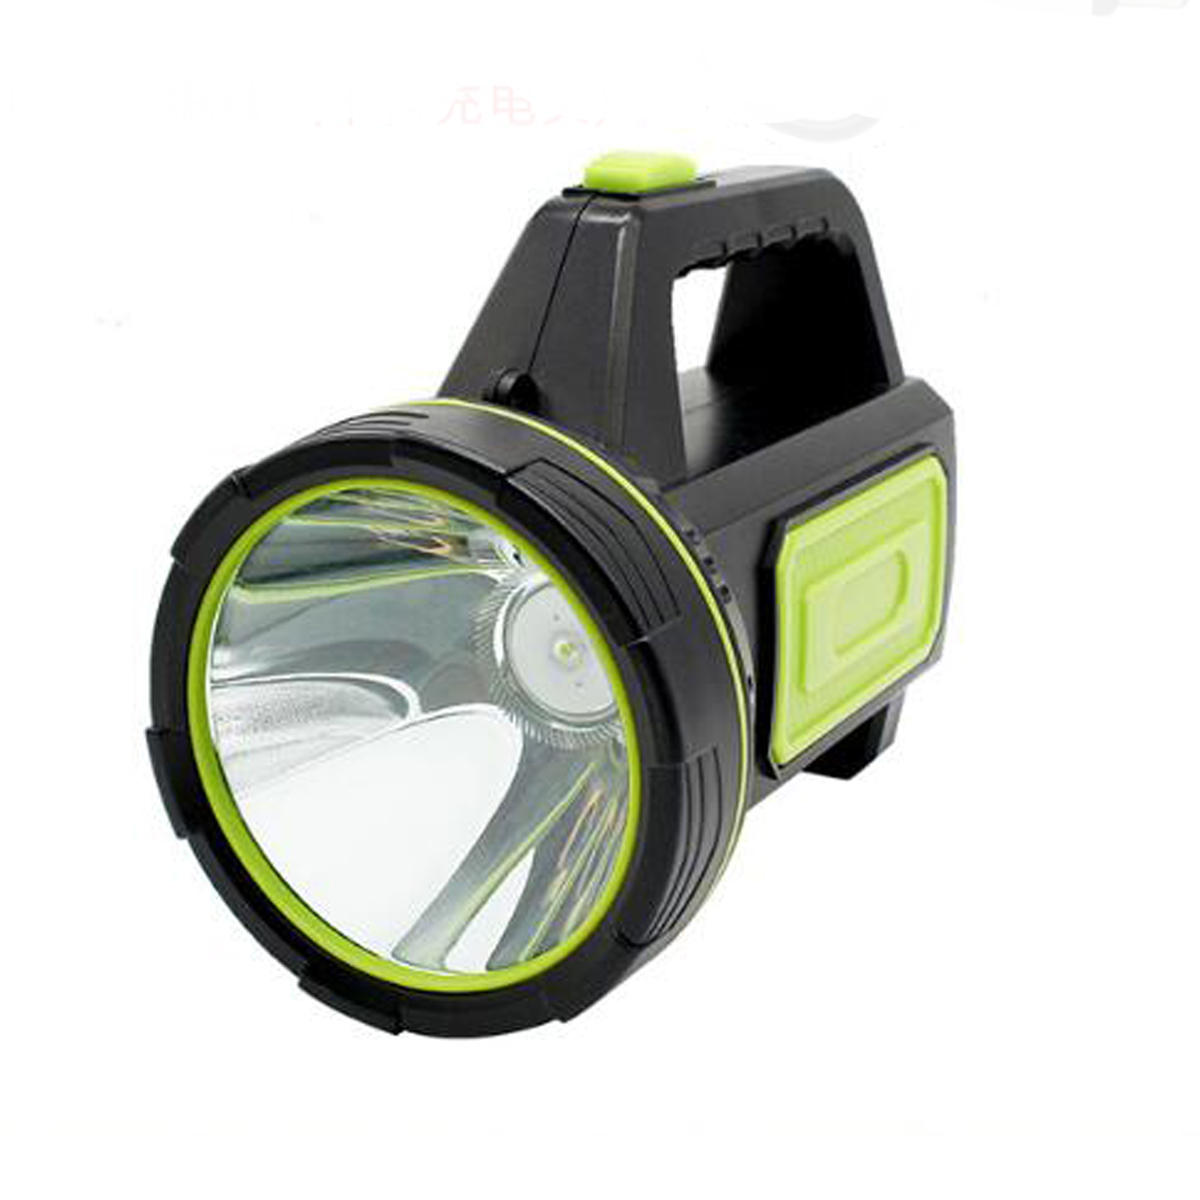 Portable Camping Light Super Bright Rechargeable Torch Flashlight Lamp for Outdoor Travel